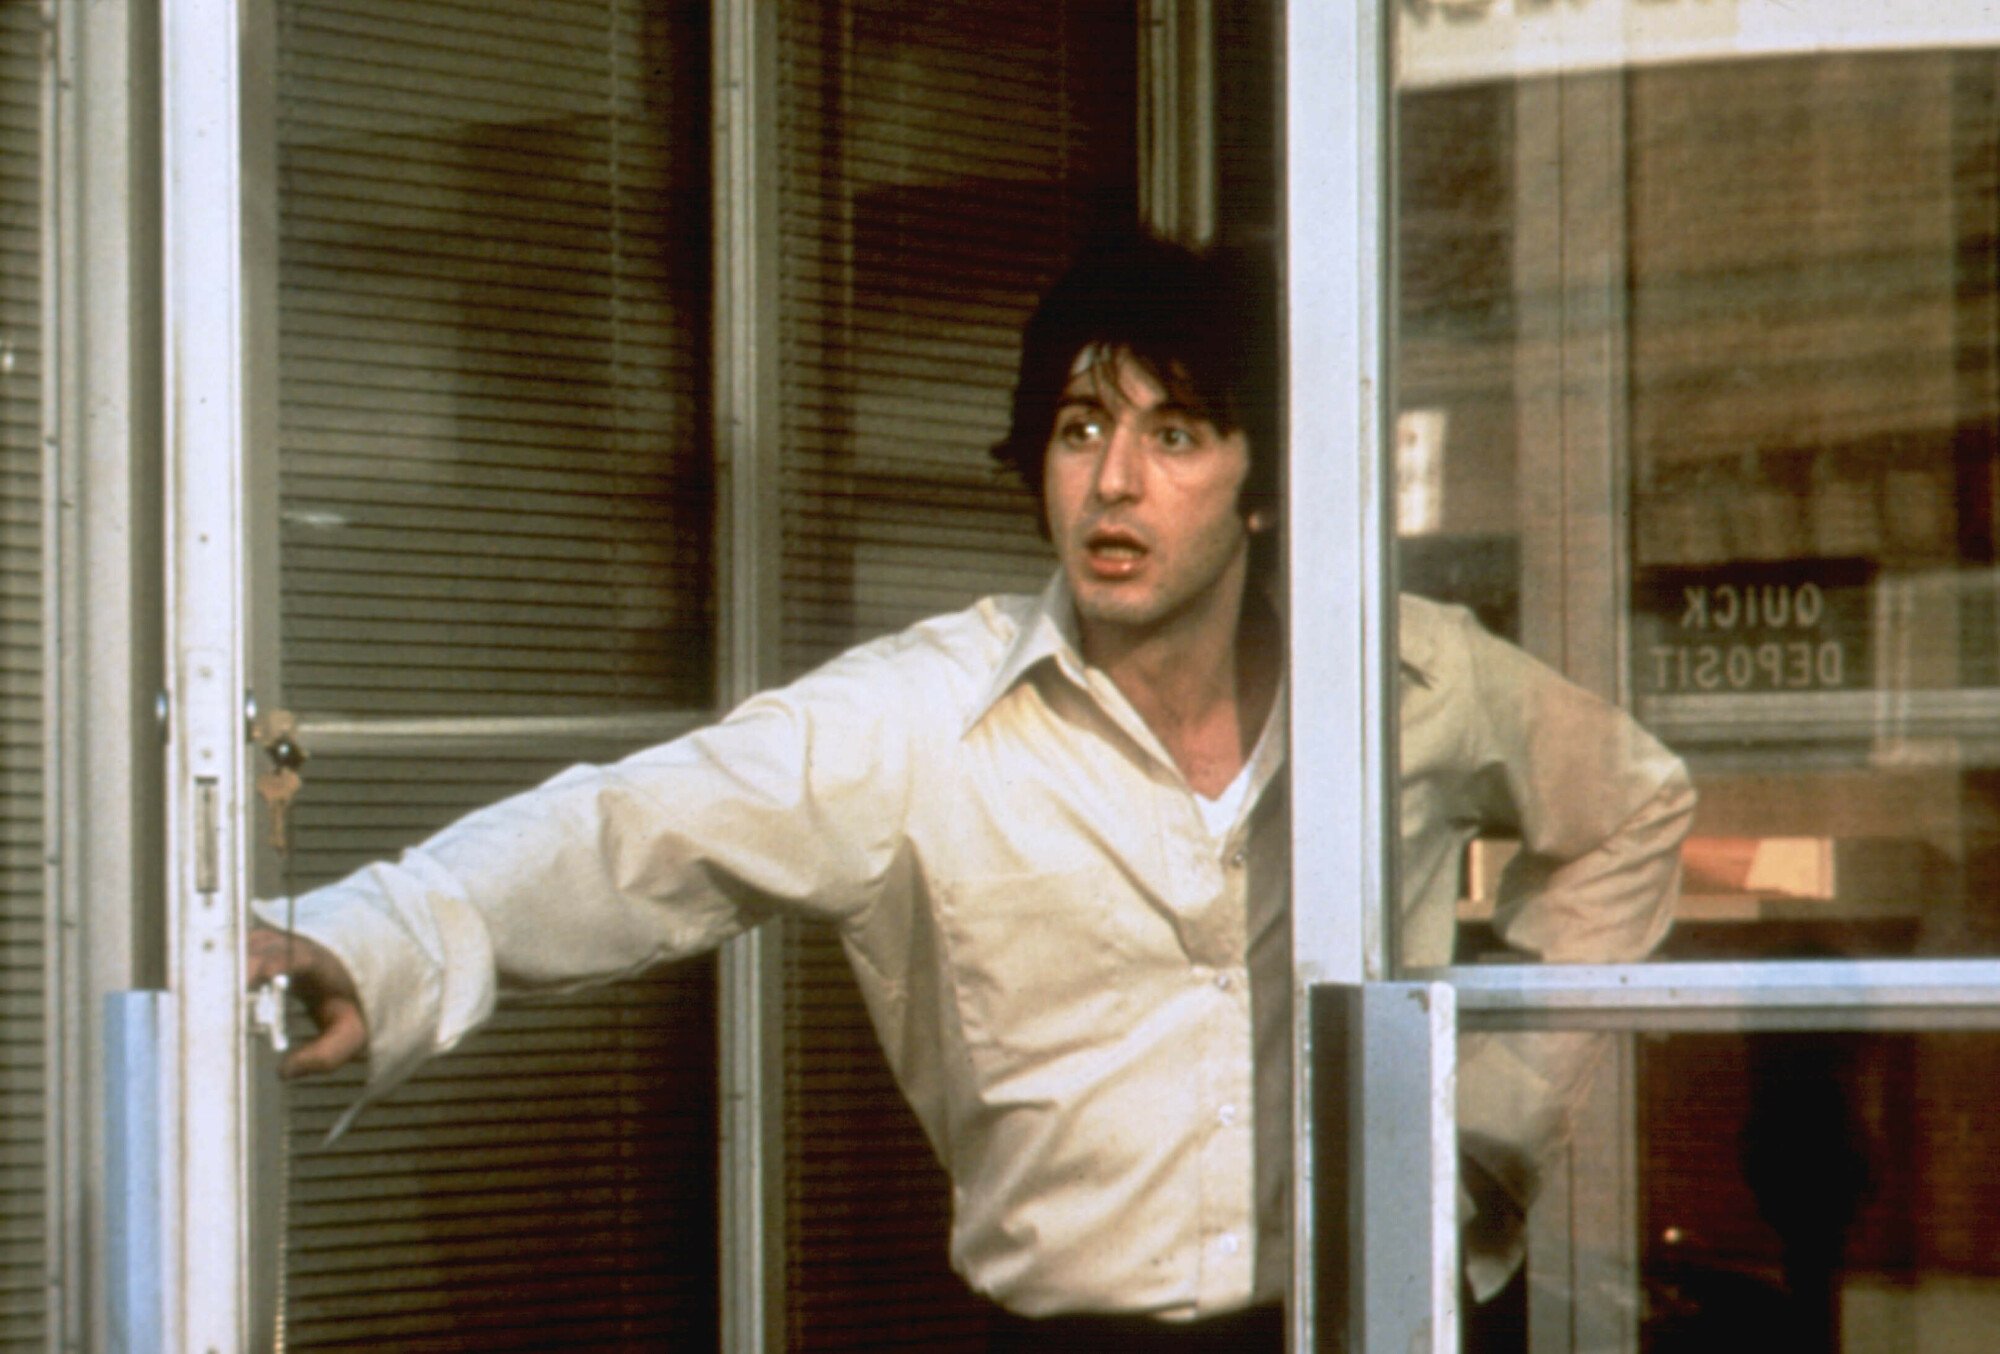 Actor Al Pacino stands in a doorway in "Dog Day Afternoon."